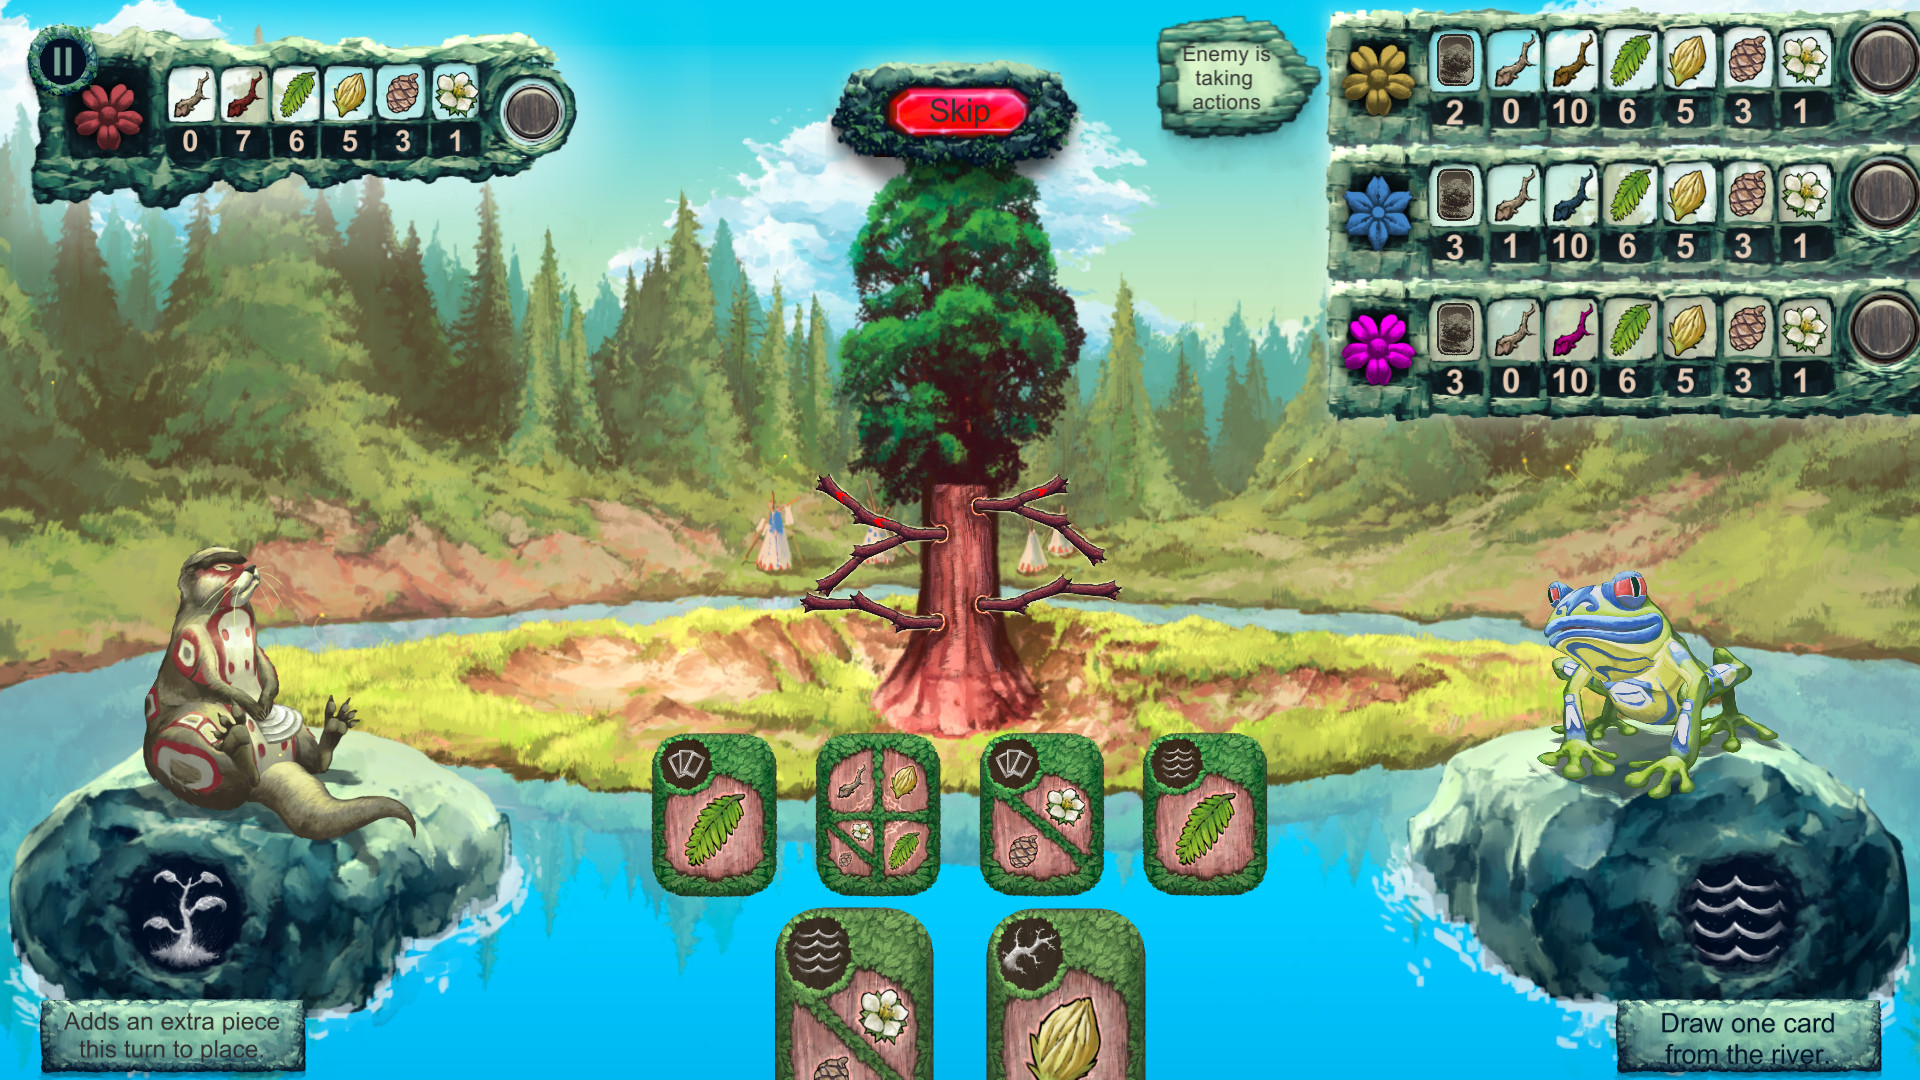 free download the first tree game